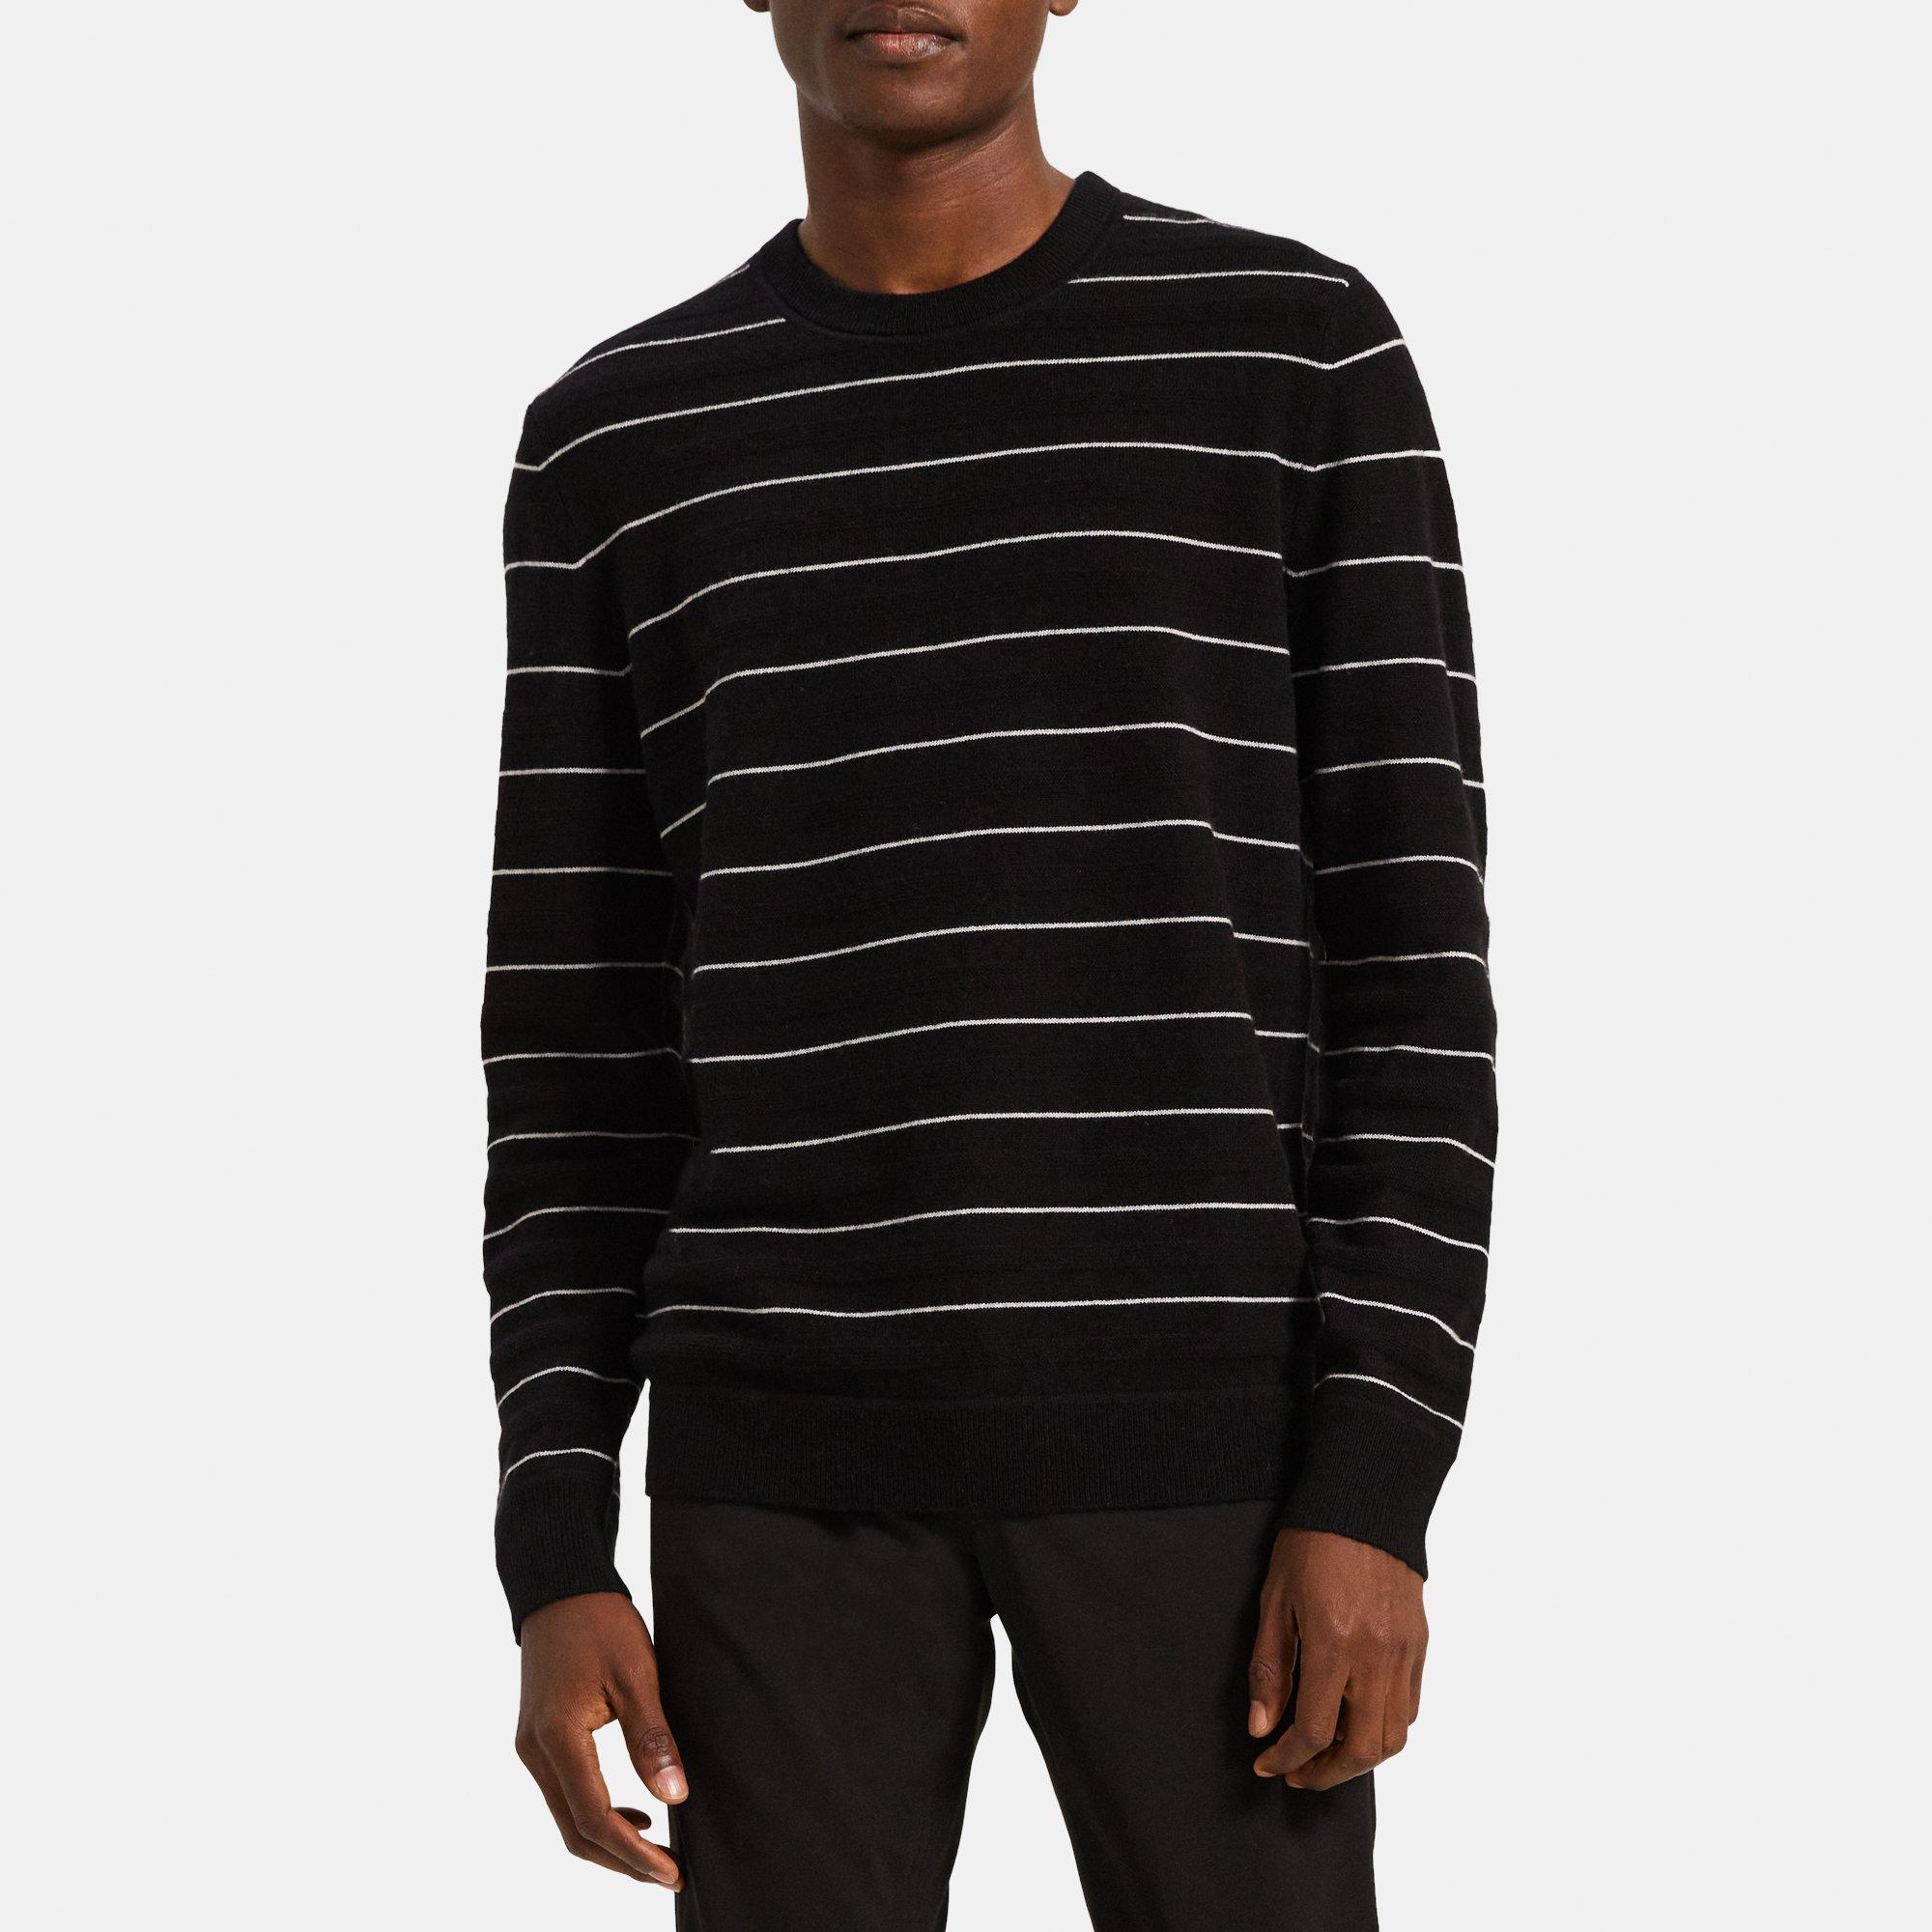 Theory Crewneck Sweater in Striped Cashmere